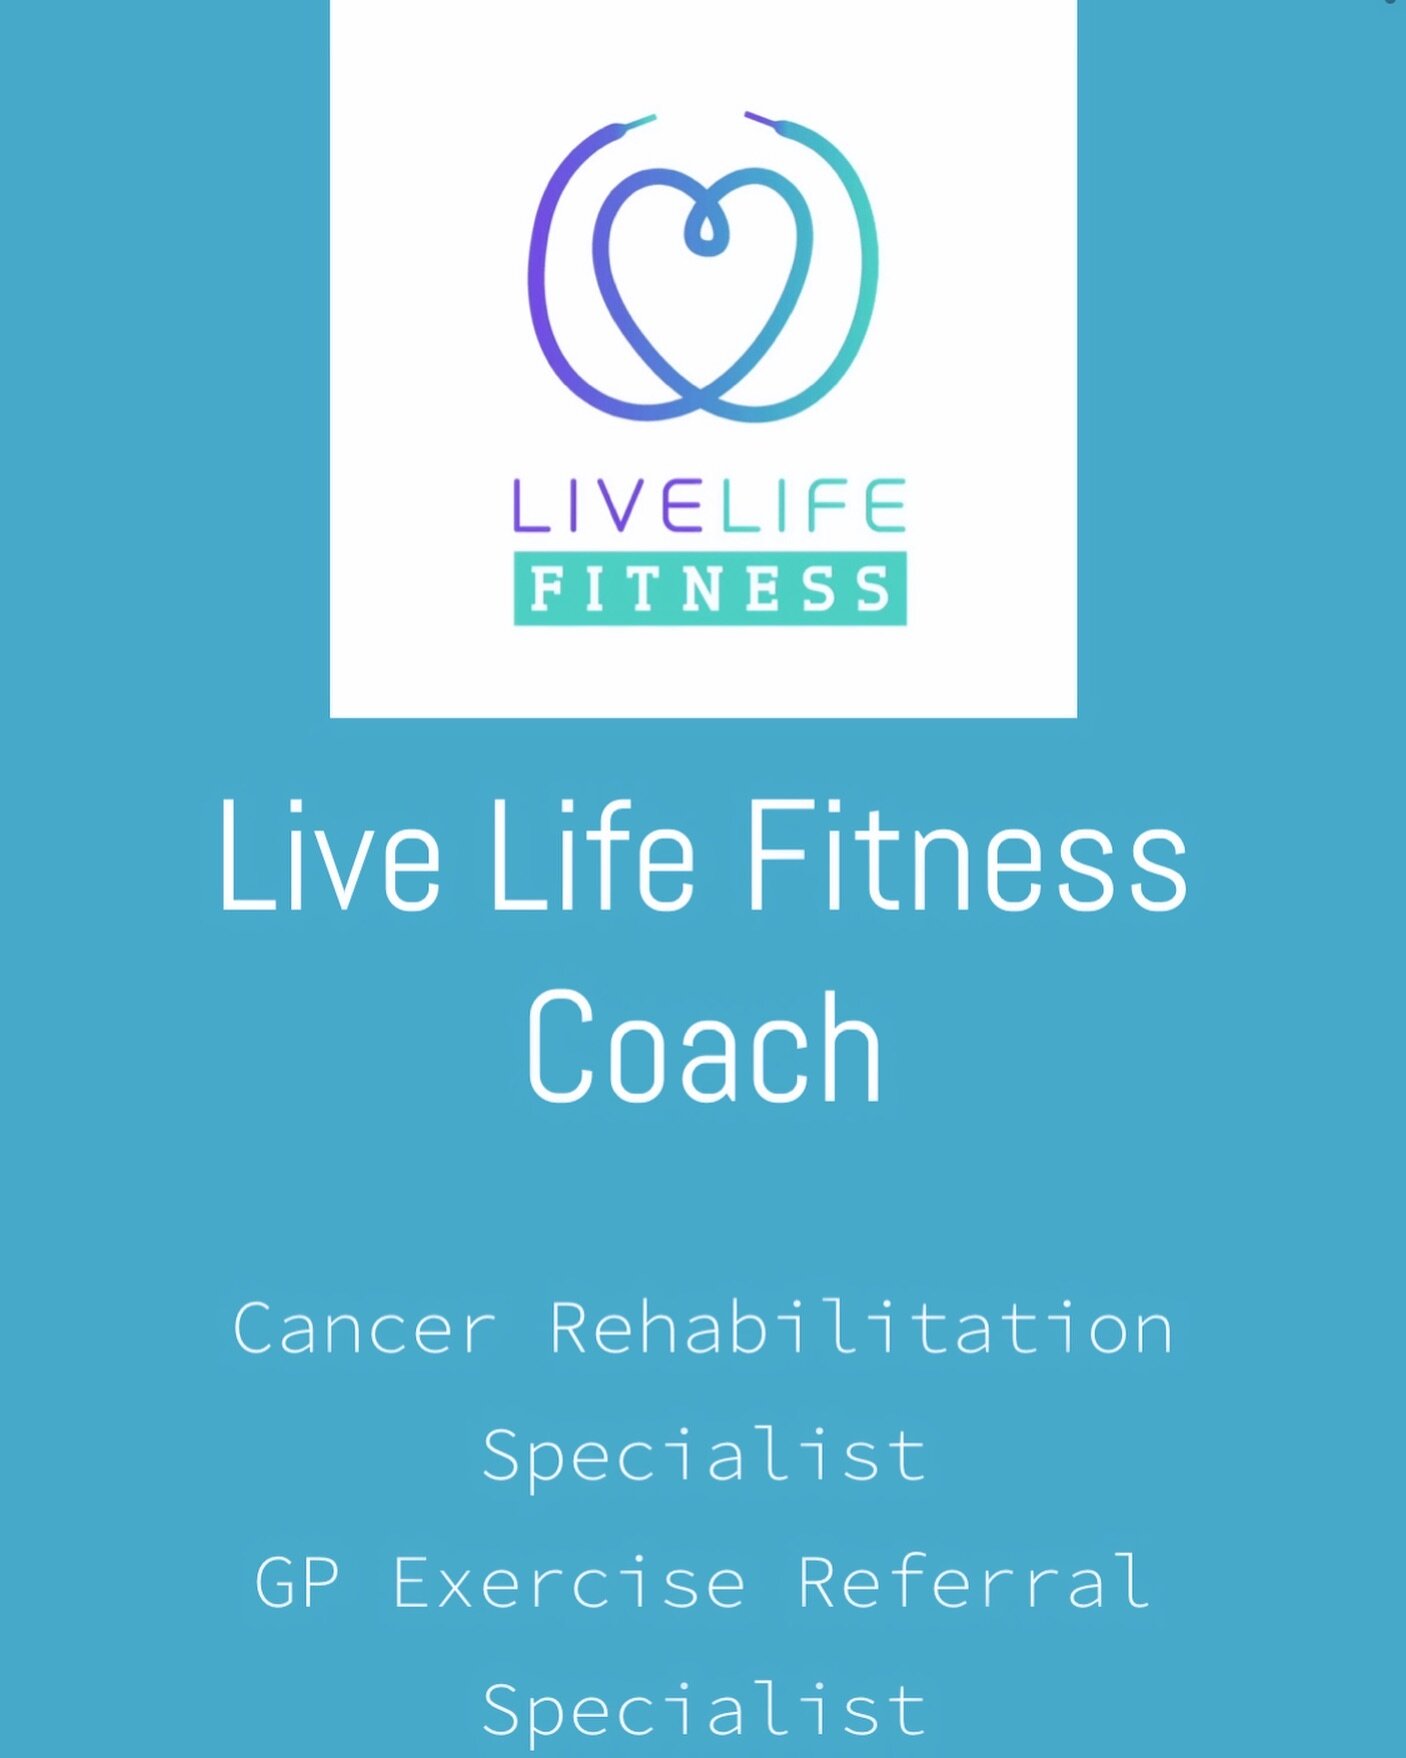 After years of wanting and needing a website&hellip;www.livelifefitnesscoach.com  @james__jersey helped put my idea to life!  Please check it out, get referring and spread the word 🎤  #exerciserehab #exercise #cancer #jerseyci #website #refer #cance